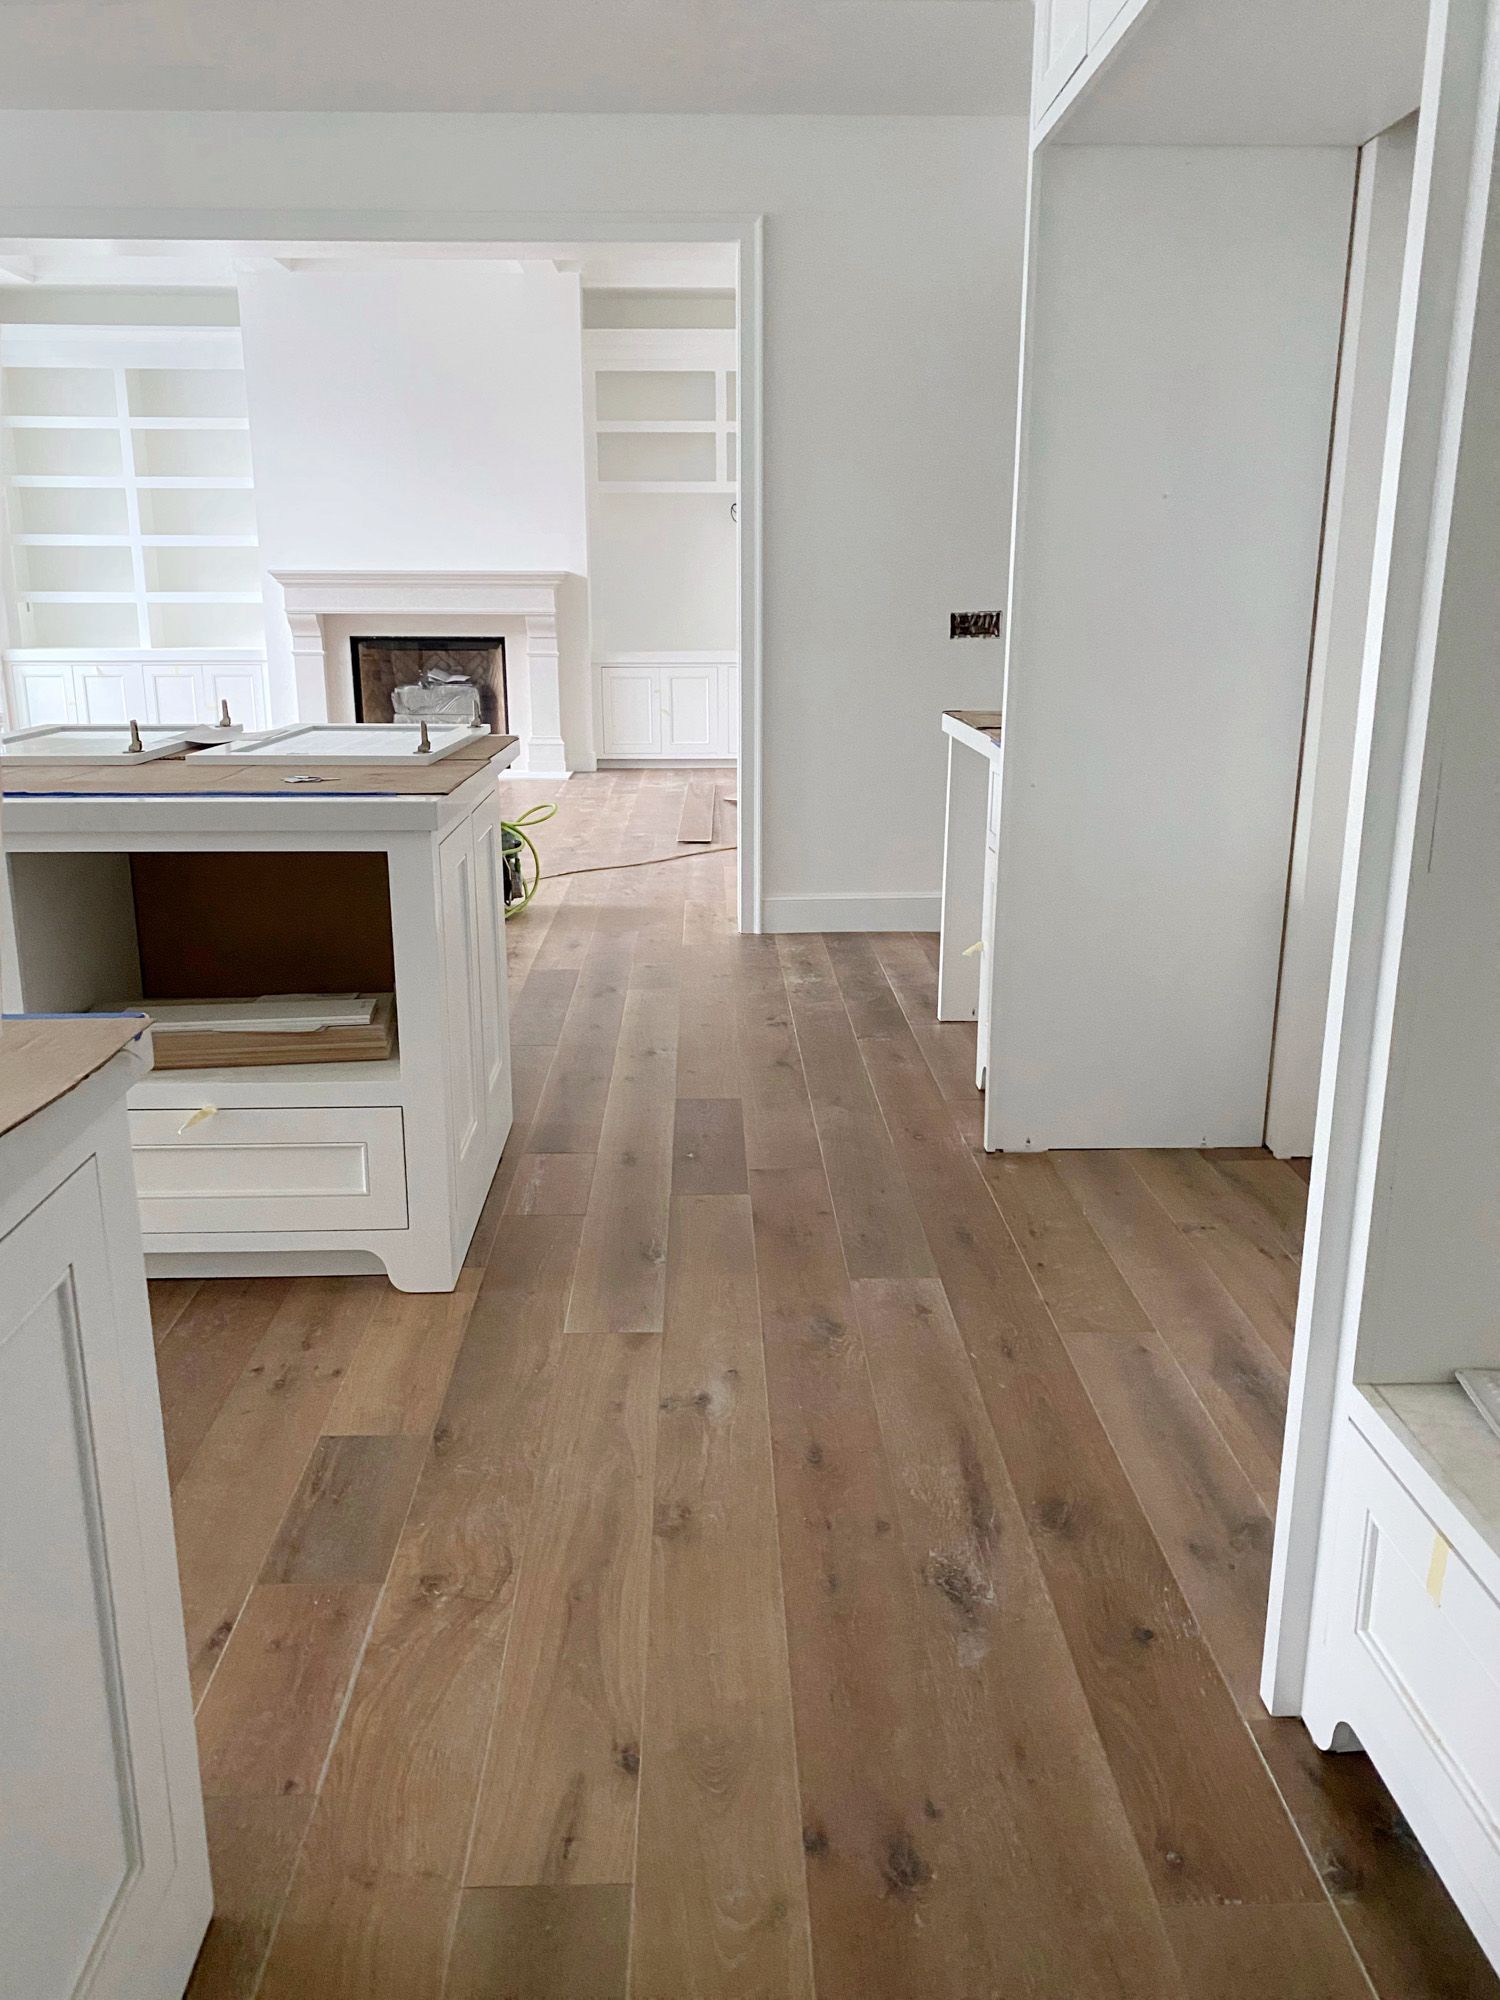 Pros and Cons of Engineered Hardwood
Flooring